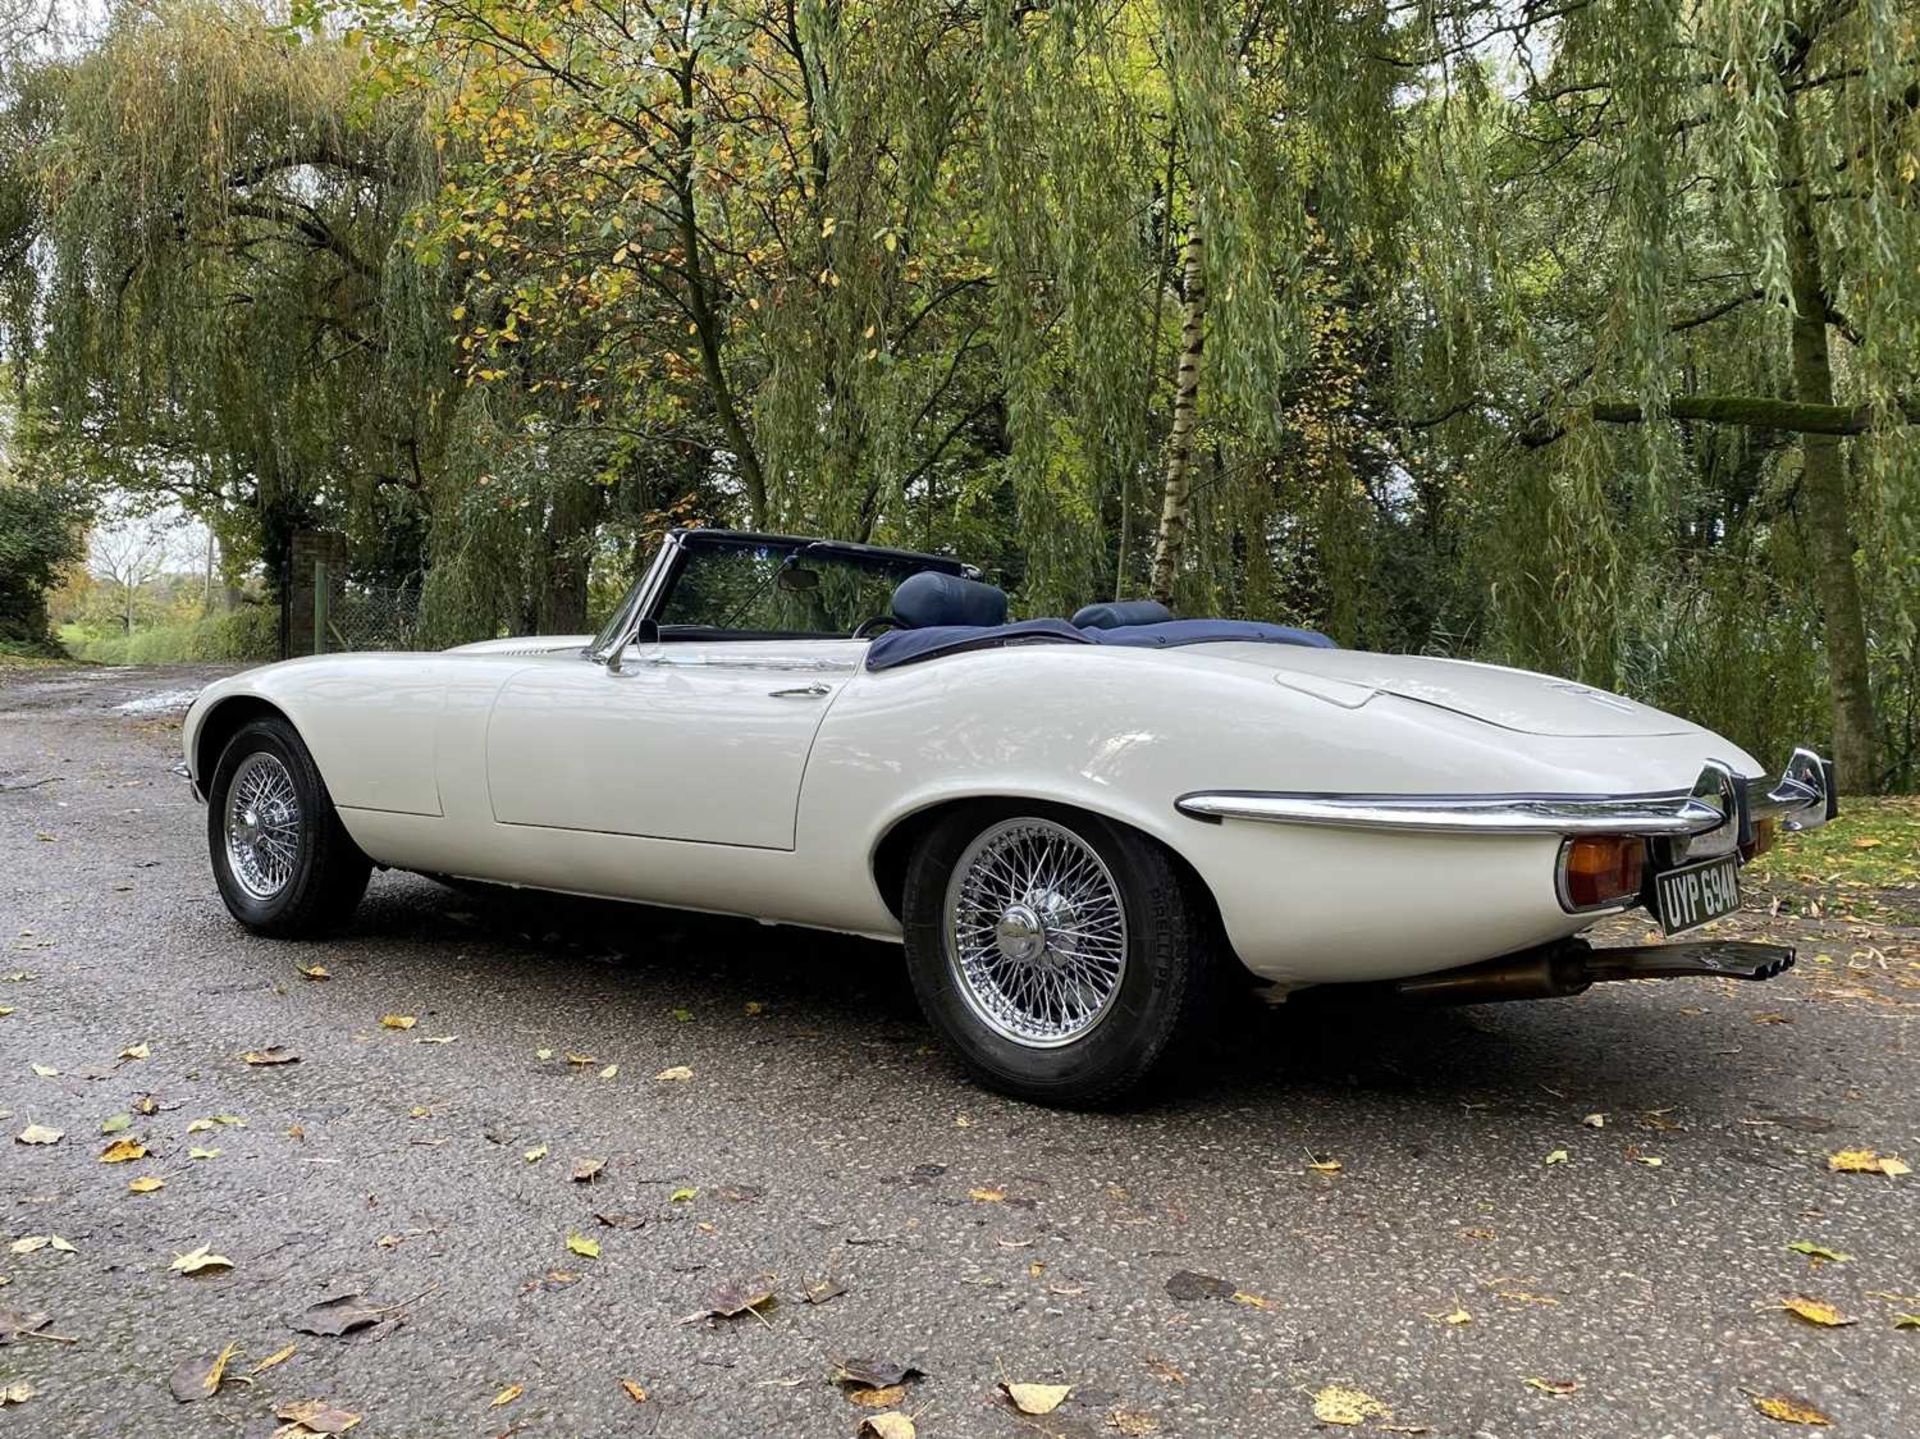 1973 Jaguar E-Type V12 Roadster As seen in Only Fools and Horses - Image 43 of 105